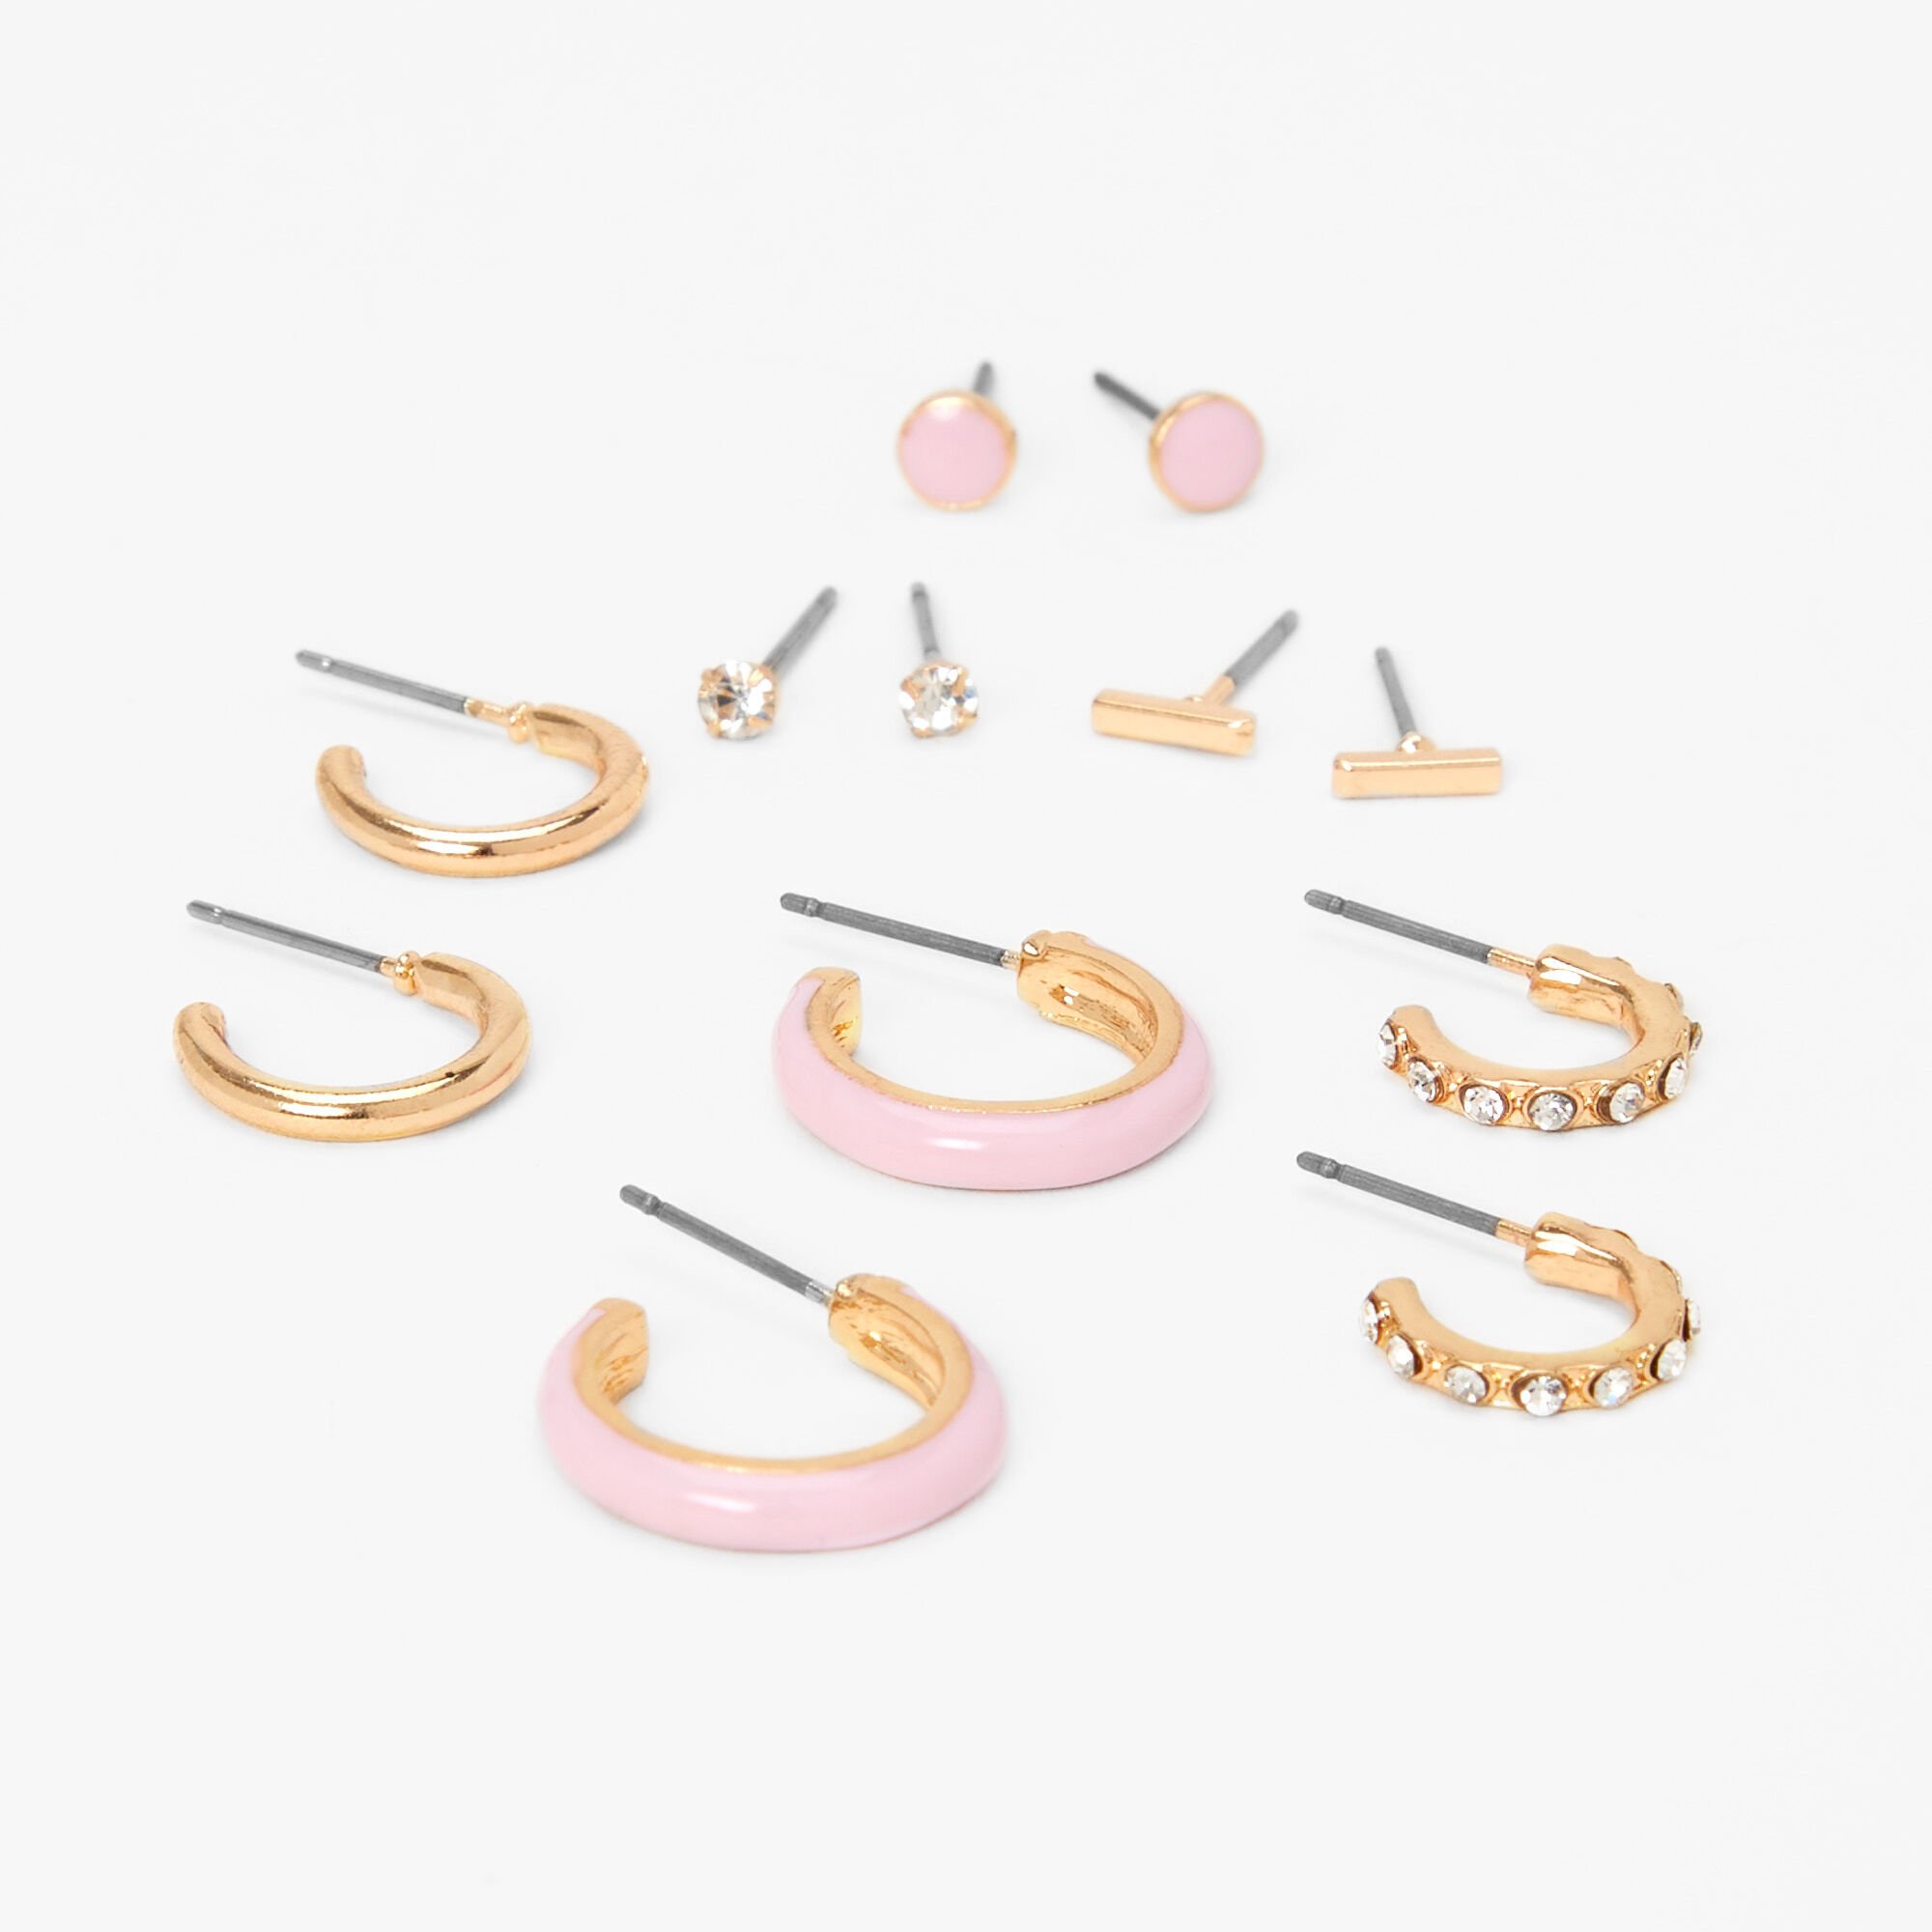 View Claires GoldTone Earrings Set 6 Pack Pink information